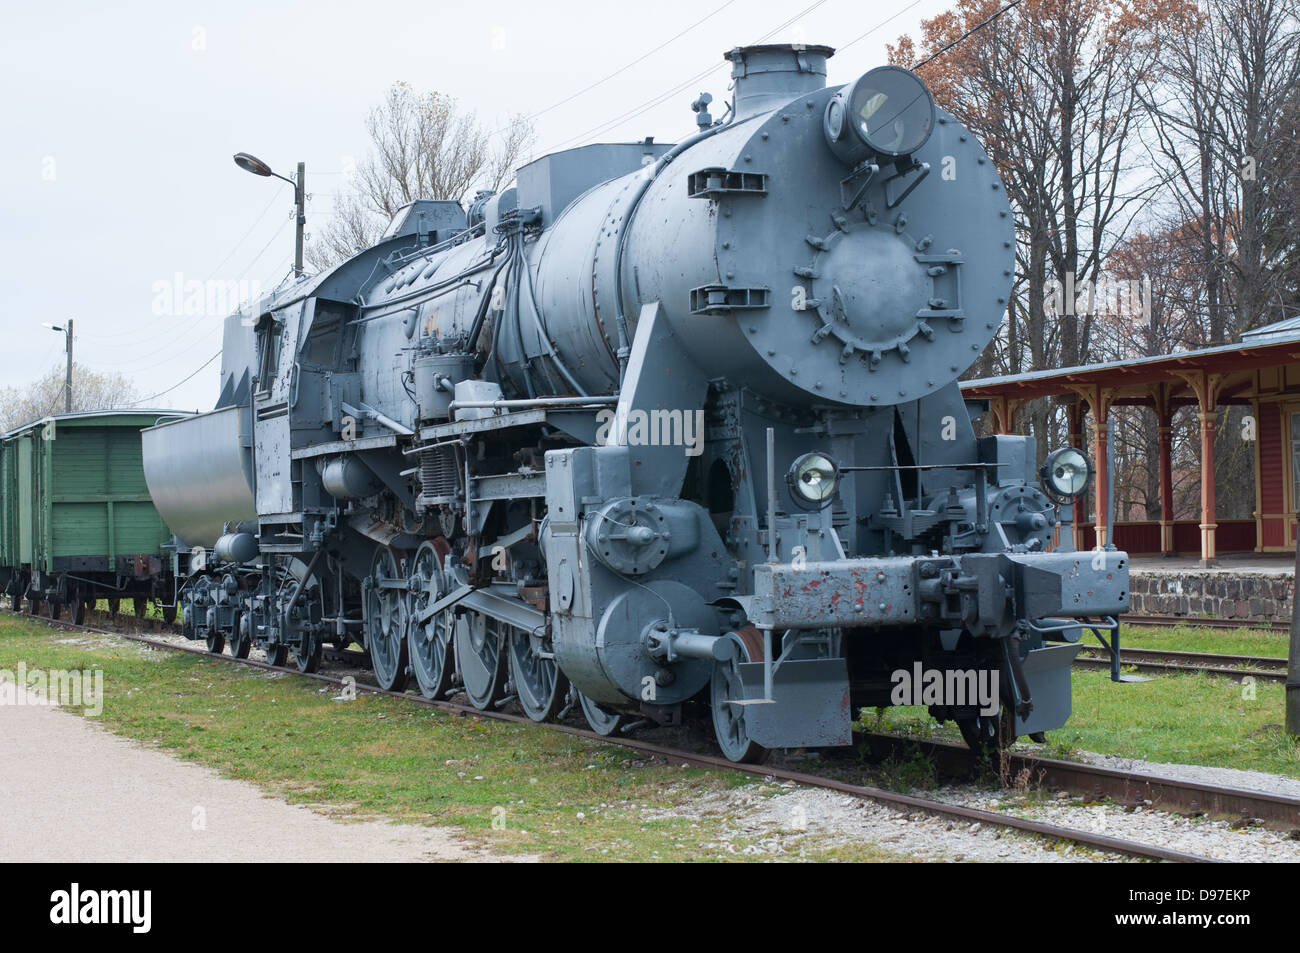 Railroad Transportation Old Steam Locomotive Front View Stock Photo Alamy